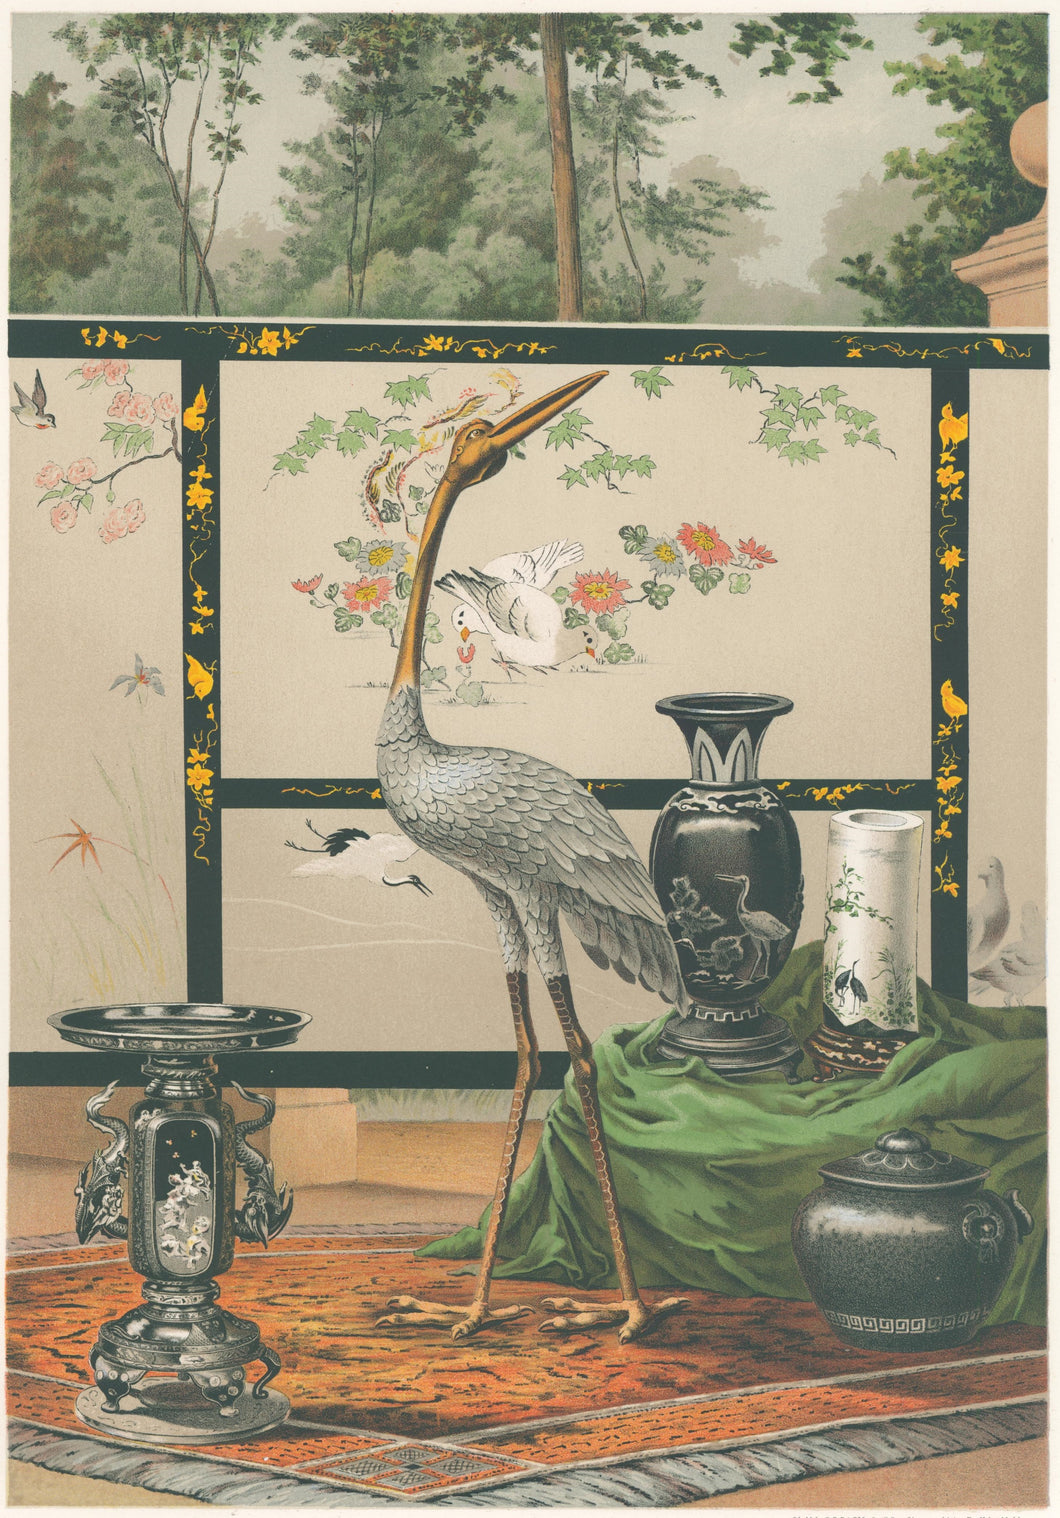 Unattributed “Embroidered Screen, Bronze & Porcelain Manufacturers.  Japan”